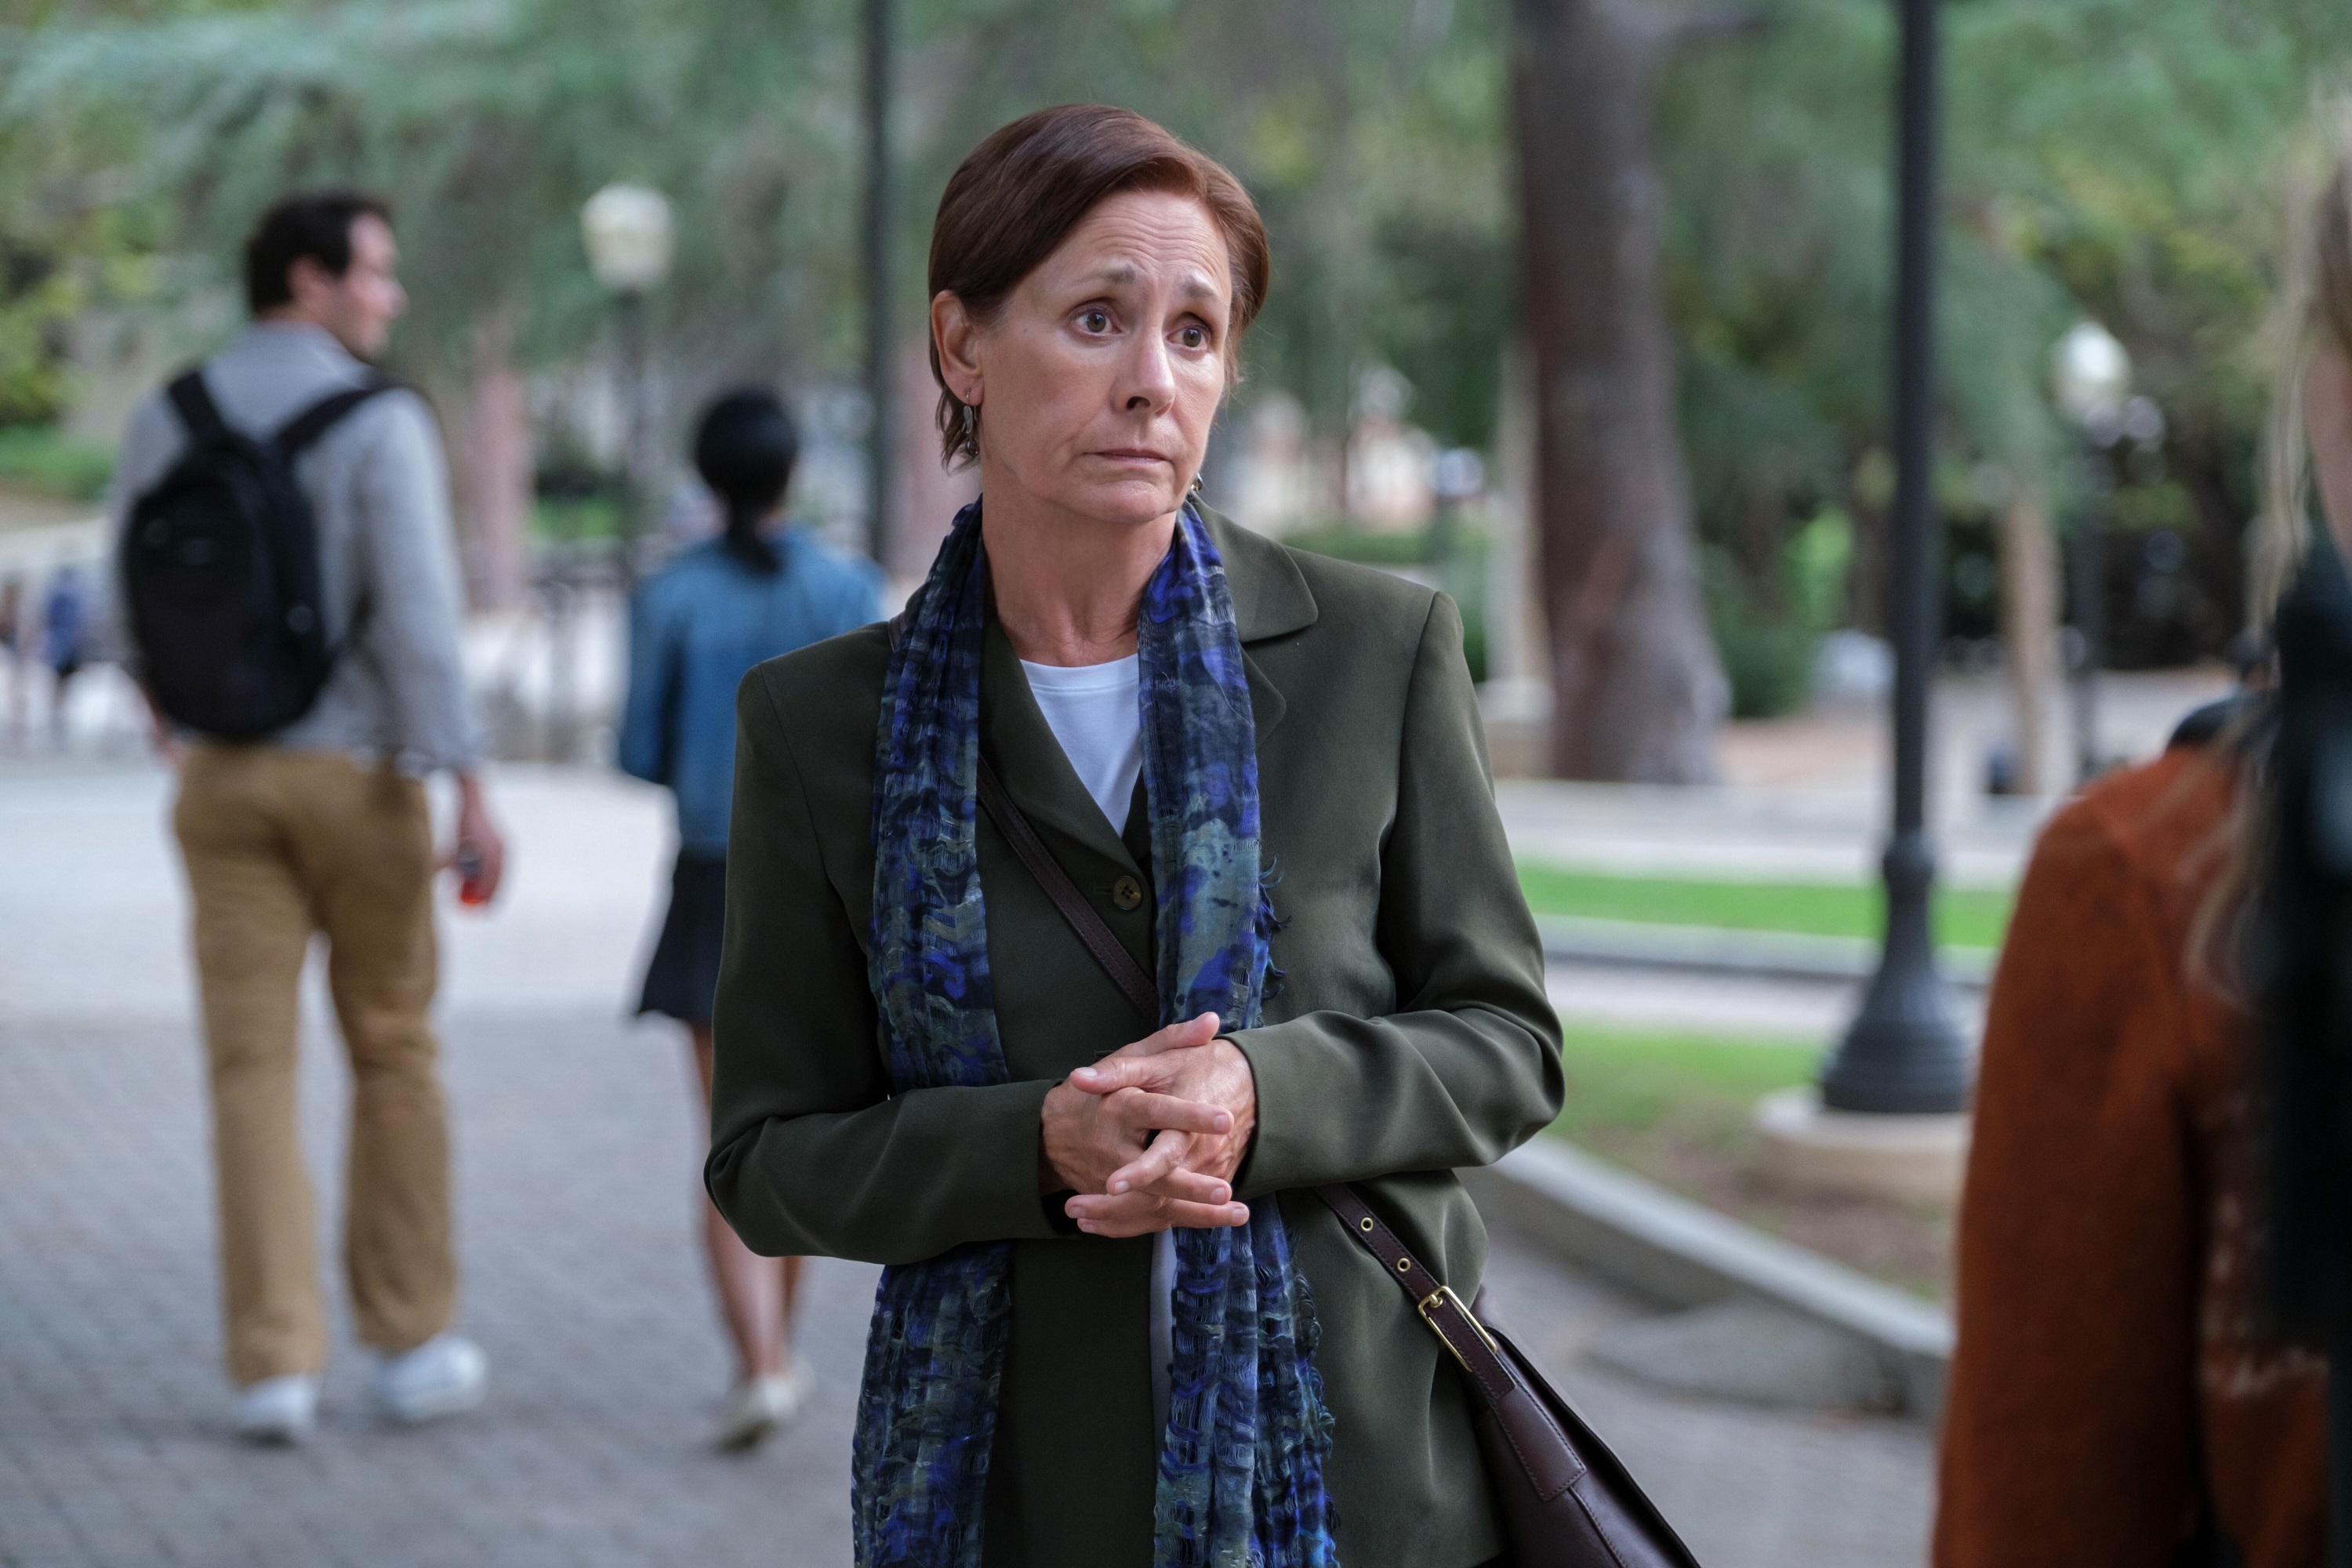 'The Dropout' cast Laurie Metcalf plays Phyllis Gardner with her hands folded.